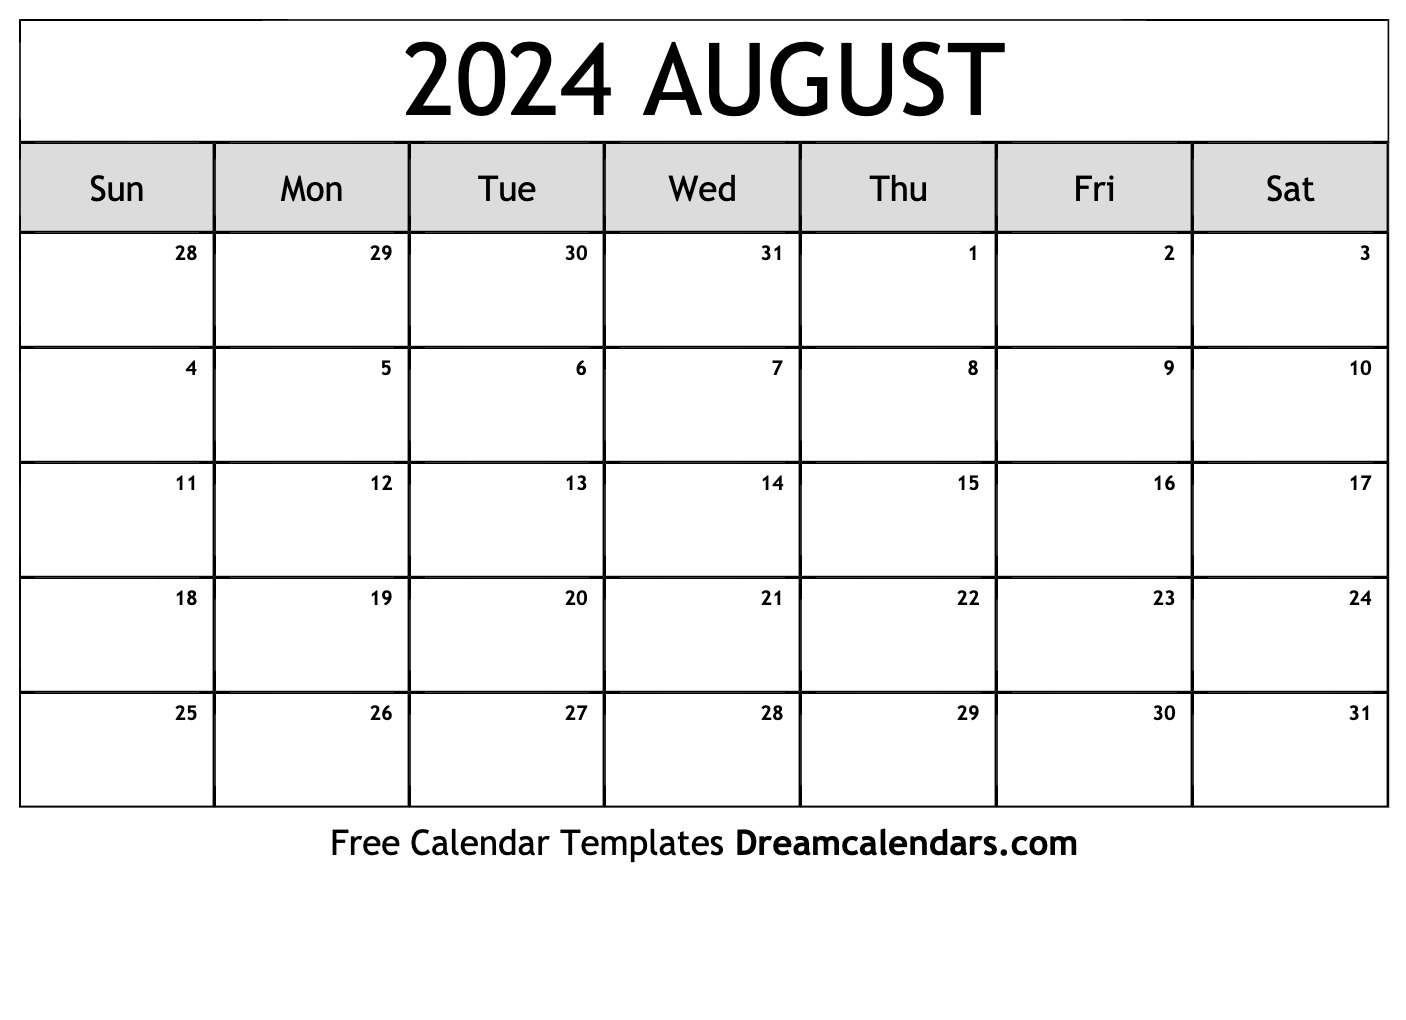 August 2024 Calendar | Free Blank Printable With Holidays for Free Printable Calendar 2024 August